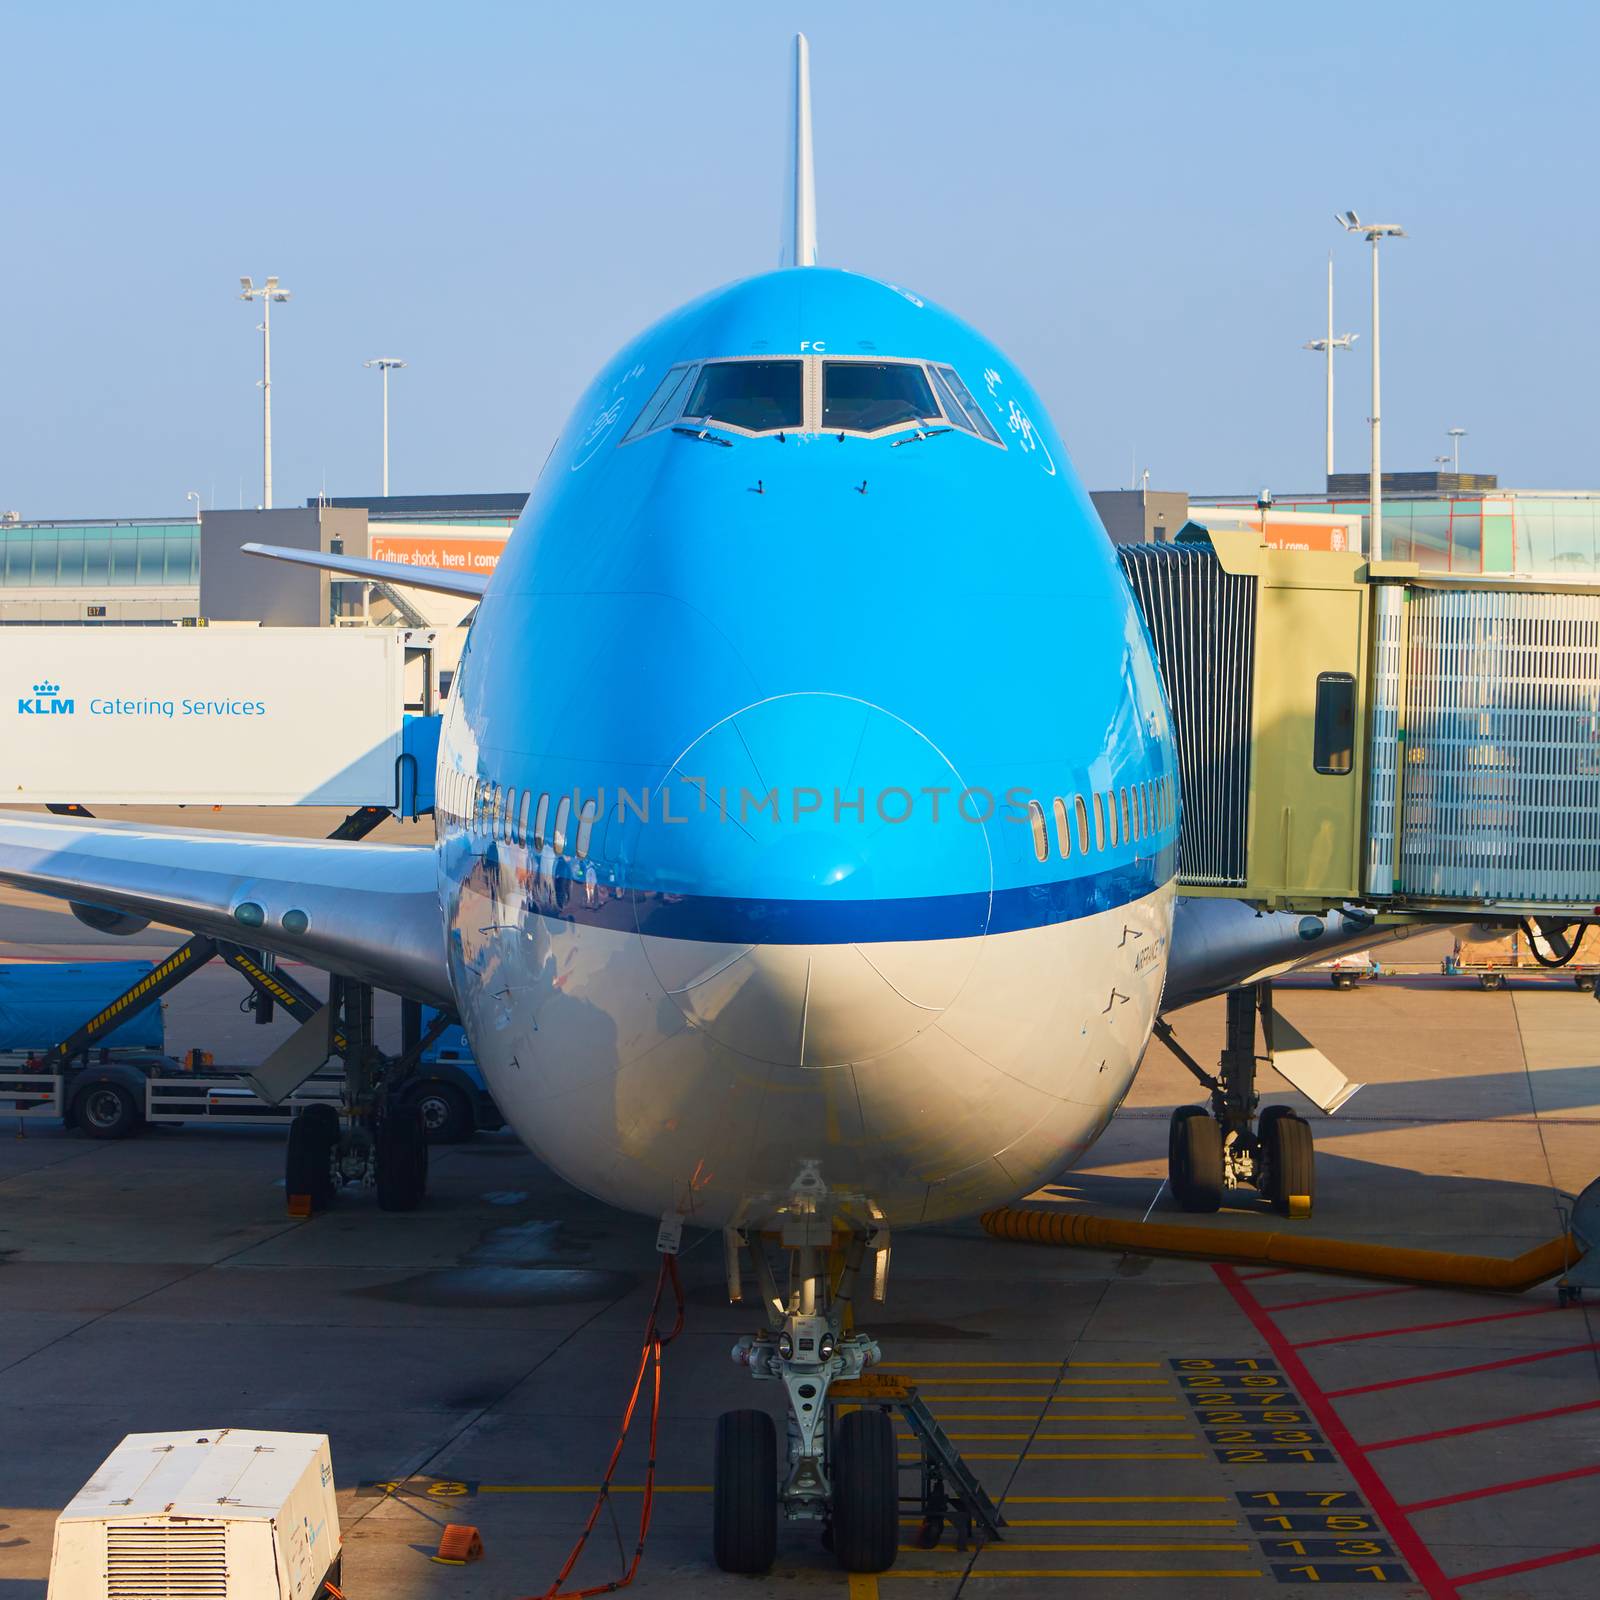 KLM plane being loaded at Schiphol Airport. Amsterdam, Netherlands by sarymsakov